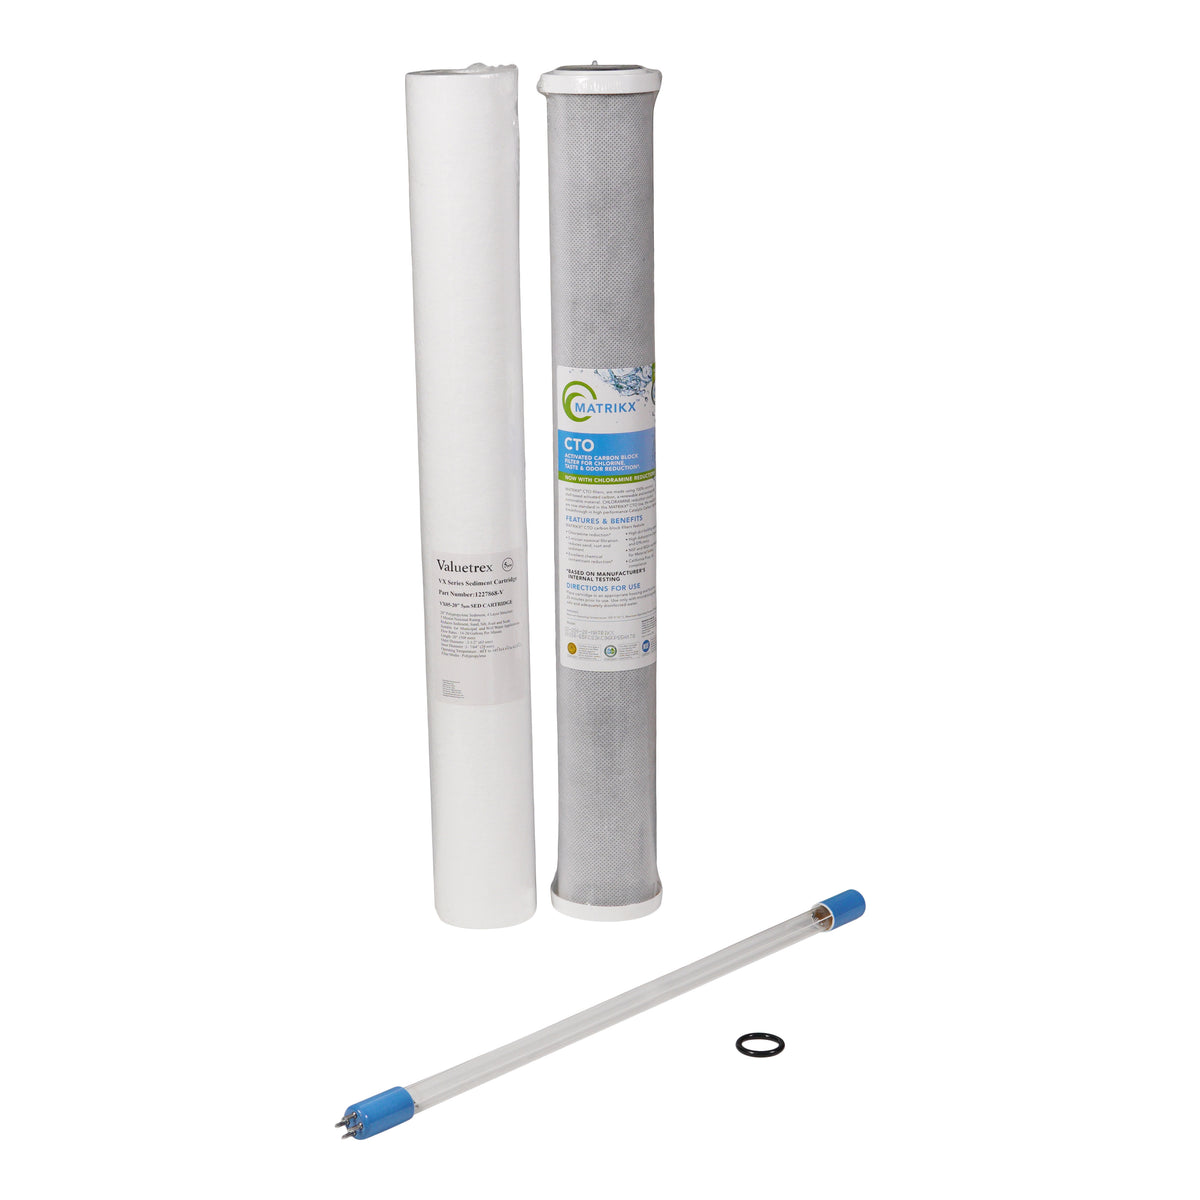 HUM Safe Water 10 Lamp and Filters Bundle | Free Ship